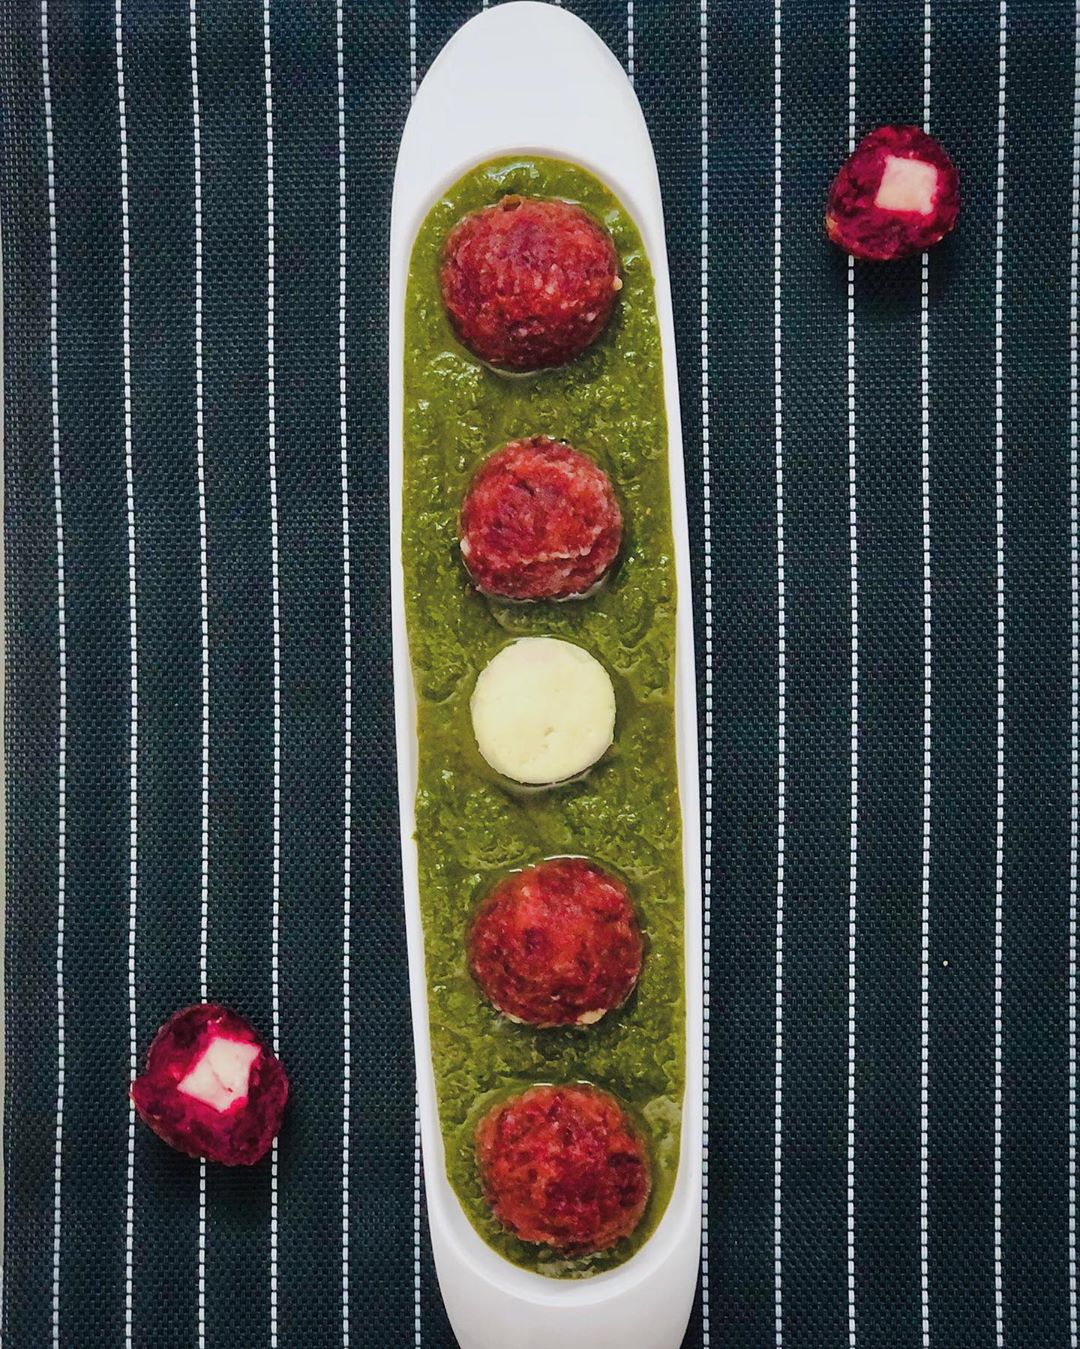 Palak Paneer and Malia Kofta are the two classics of every Indian house. But what would happen if you combine the two??.................. 
So here is Palak Paneer with beetroot Kofta!! 
Filled with the goodness of (sailor man) Popeye's favorite 